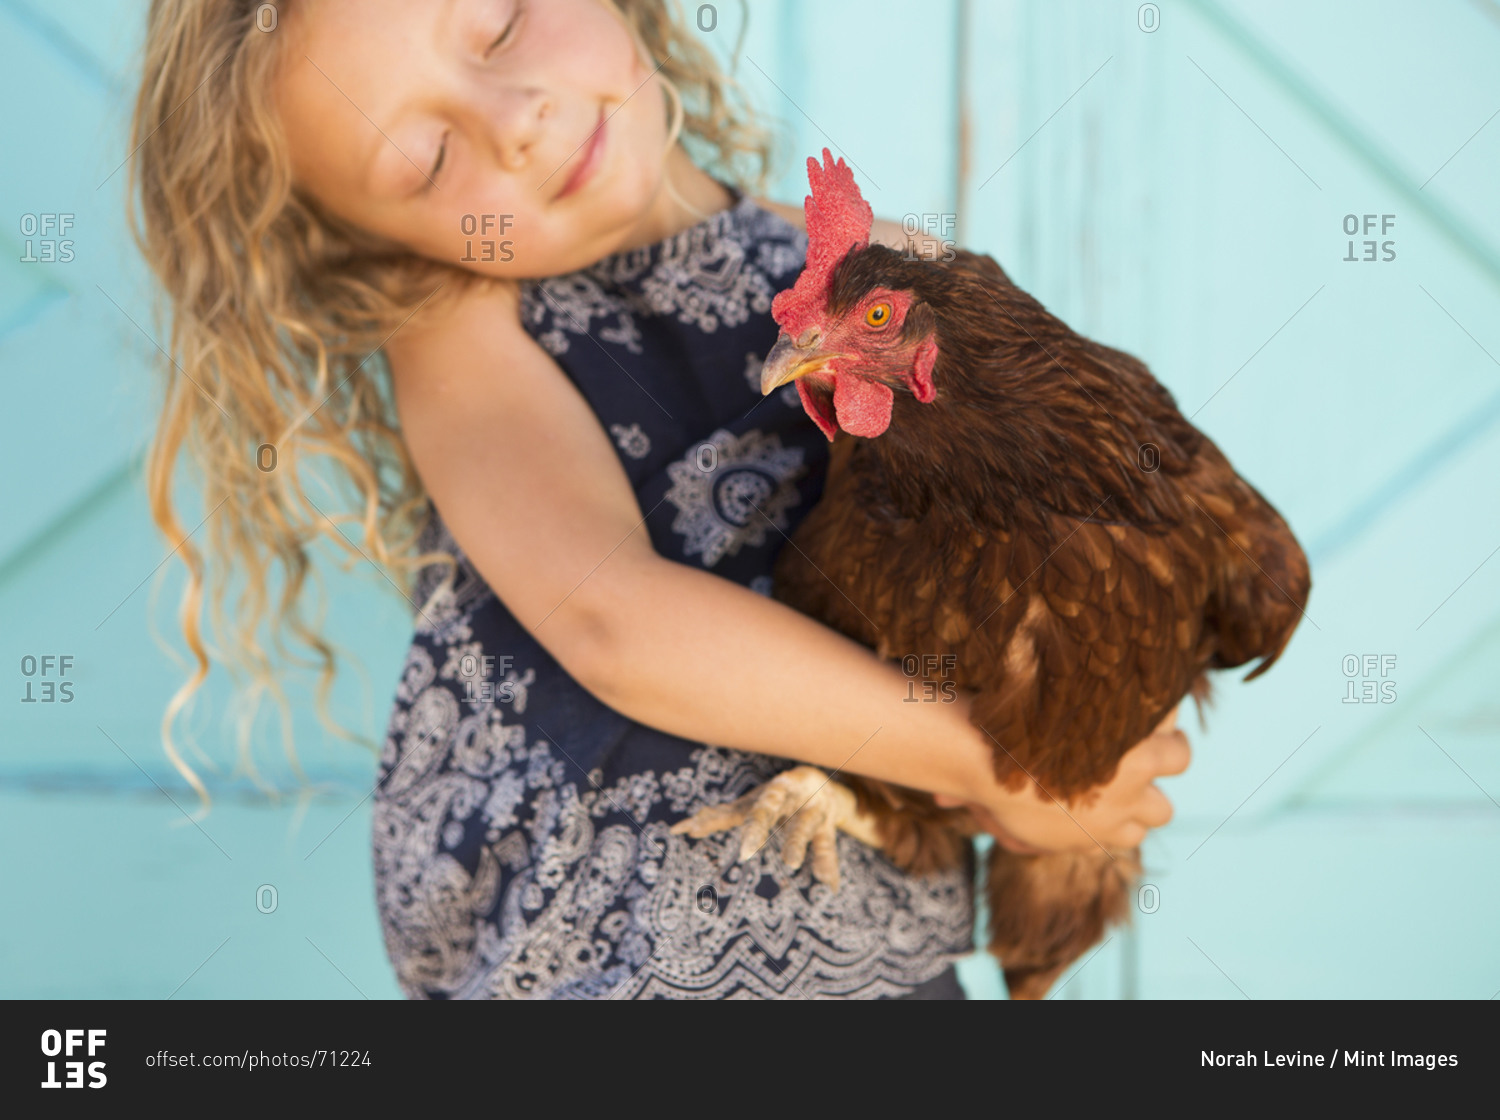 Cute girl holding a red chicken in her arms